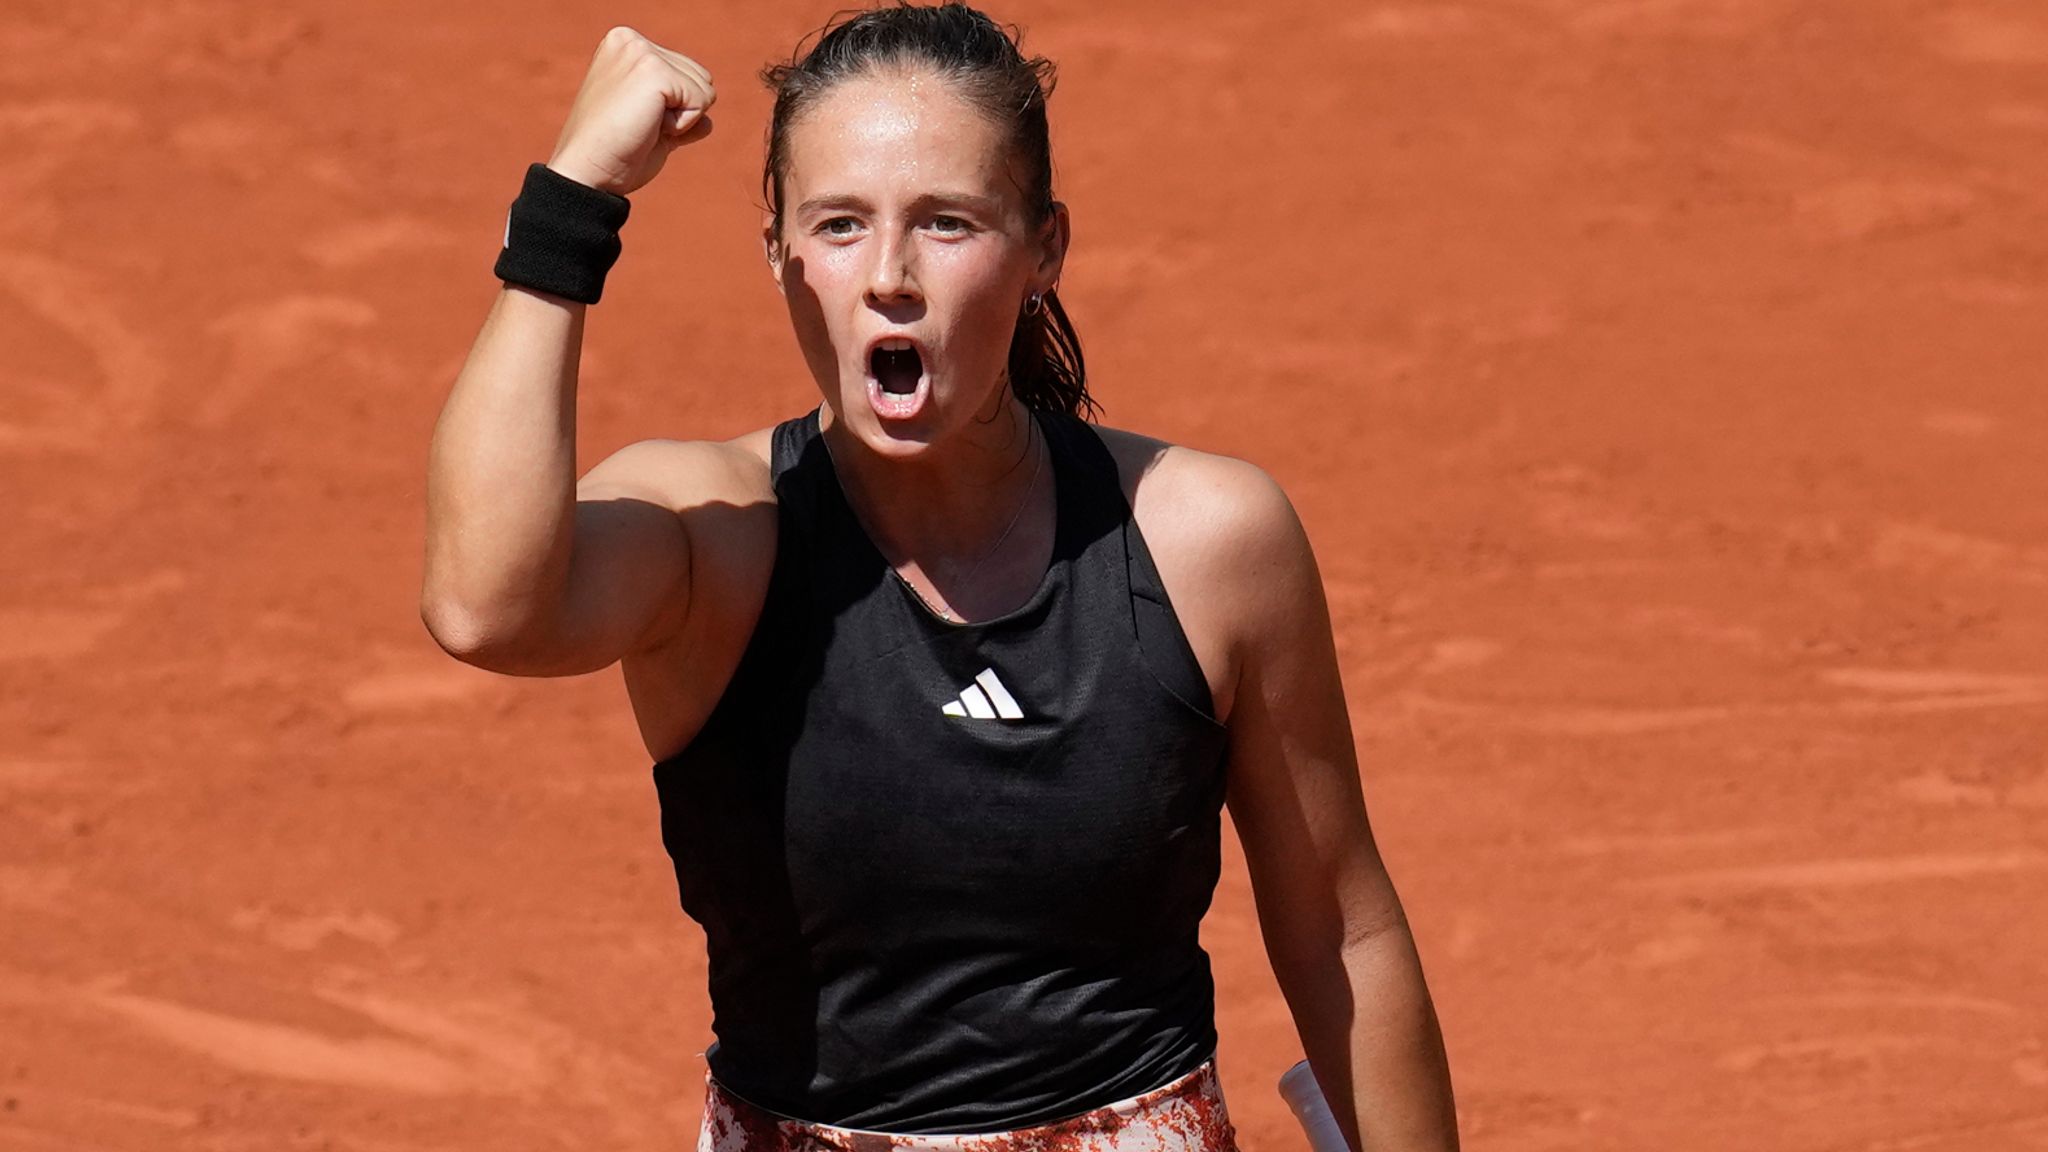 French Open Daria Kasatkina hits out after being booed off court following defeat to Elina Svitolina Tennis News Sky Sports